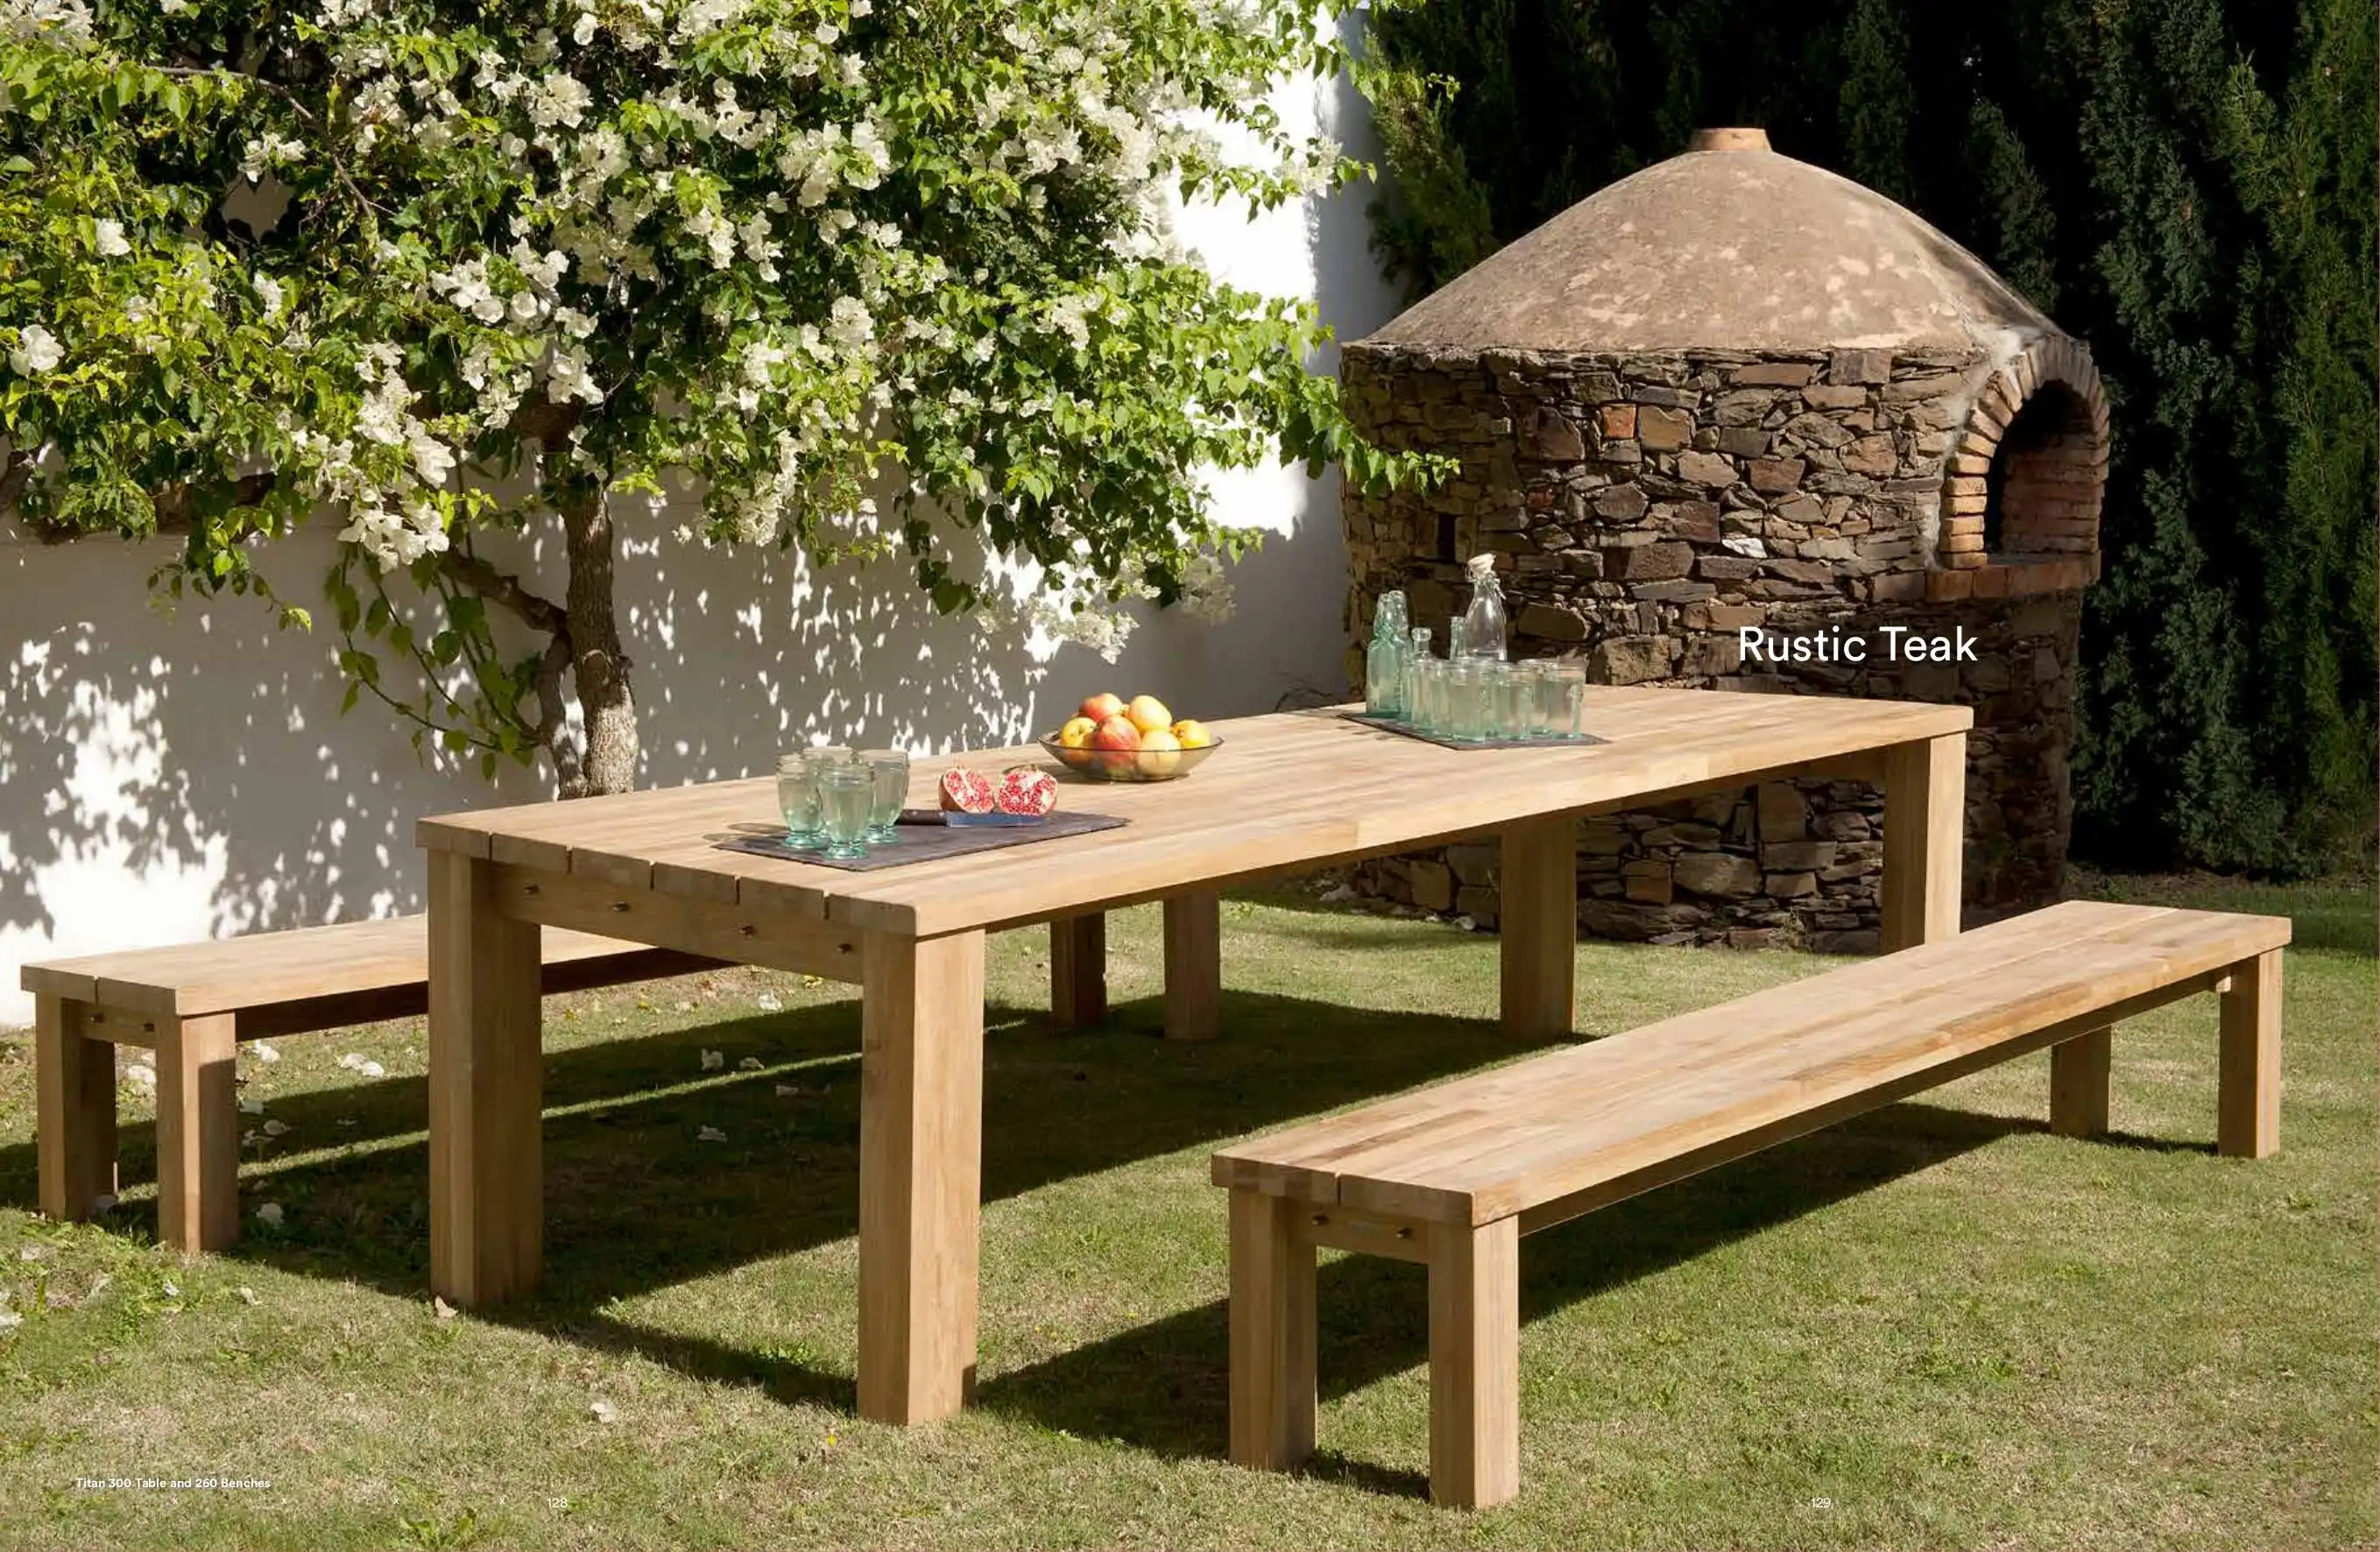 RUSTIC (Teak) Dining Table & Benches by Barlow Tyrie